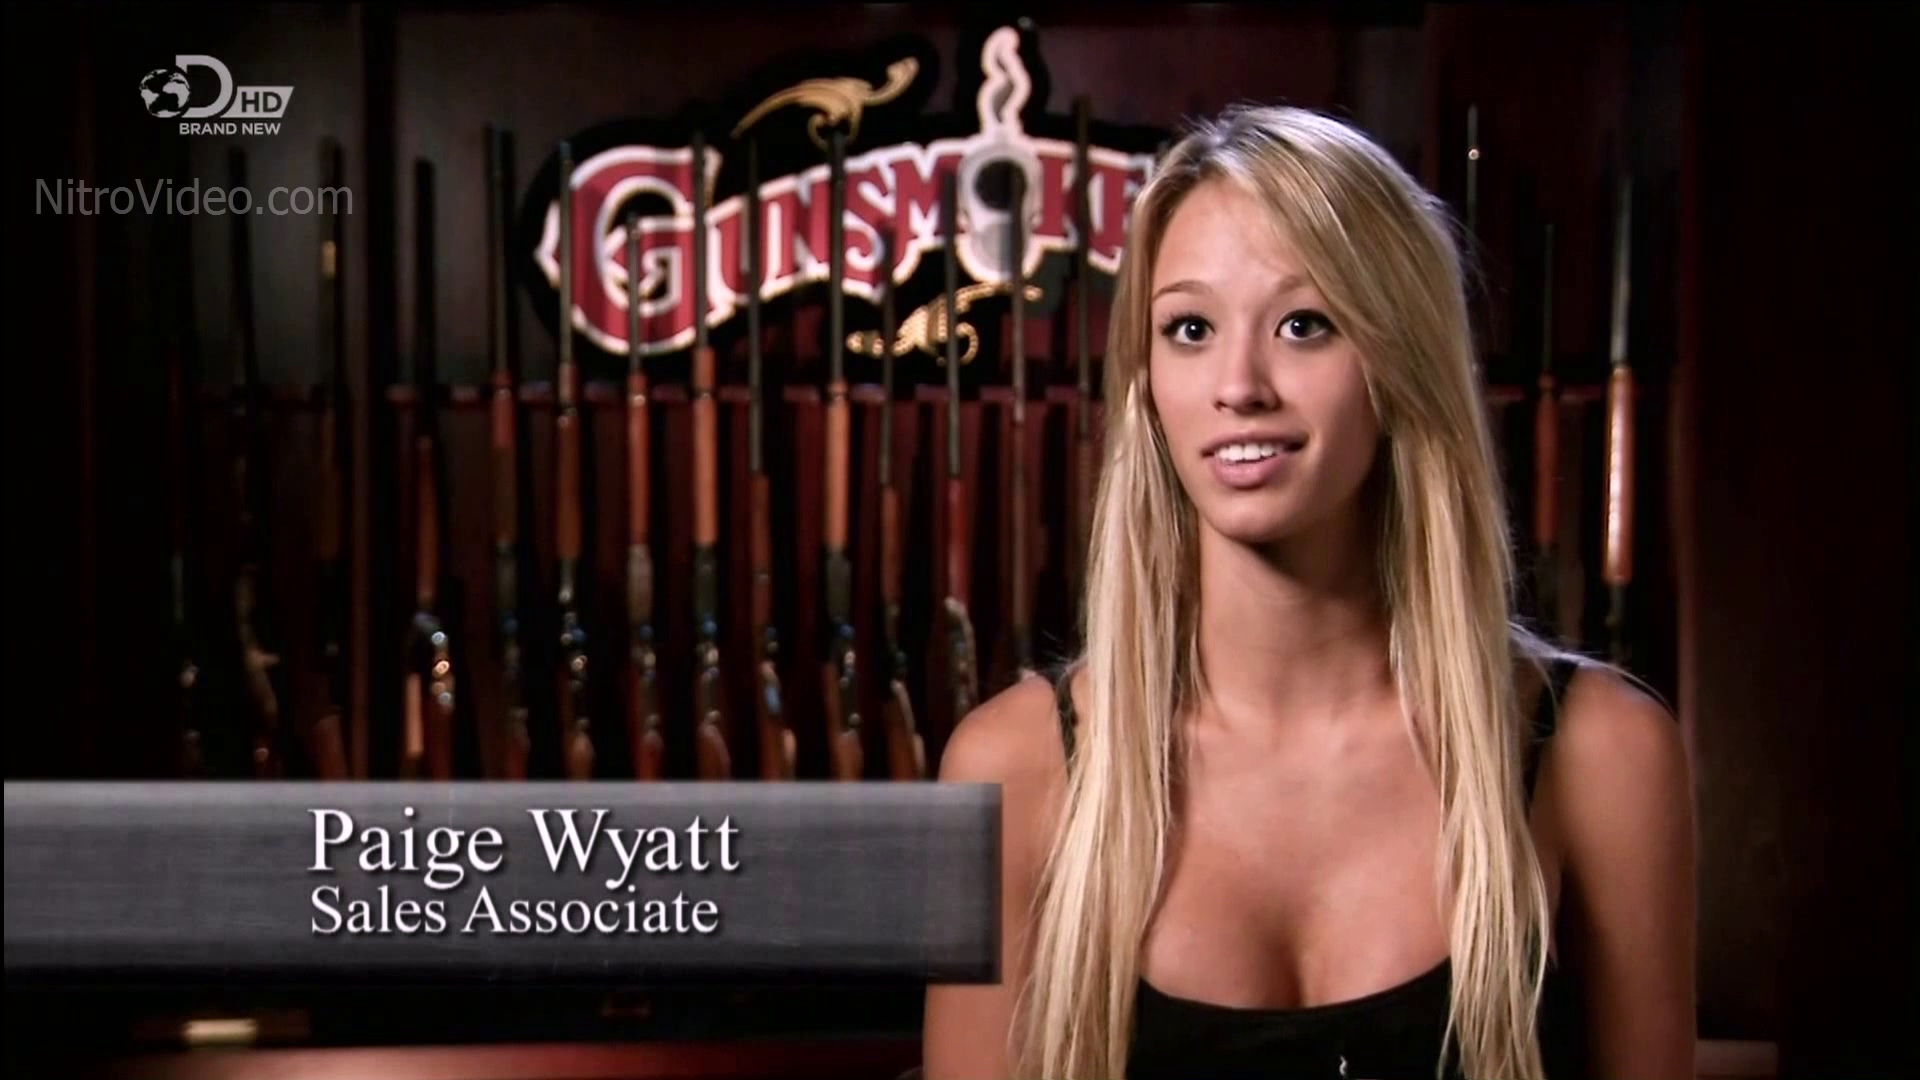 Paige Wyatt nude or sexy in America Guns - Video Clip #02.